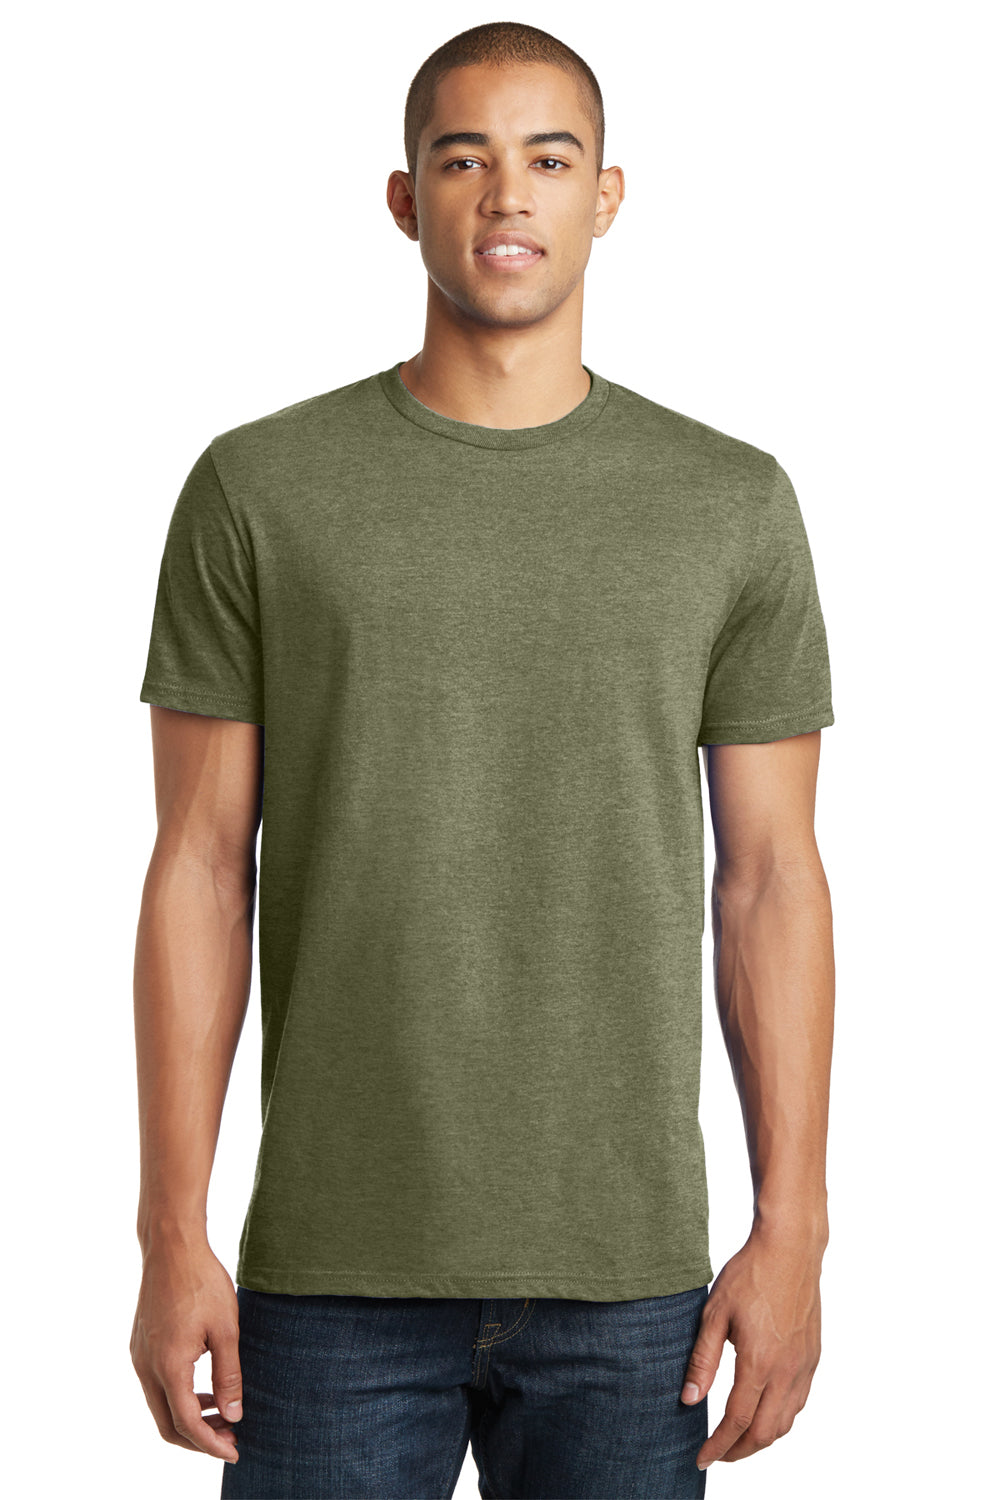 District DT5000 Mens The Concert Short Sleeve Crewneck T-Shirt Military Green Frost Front